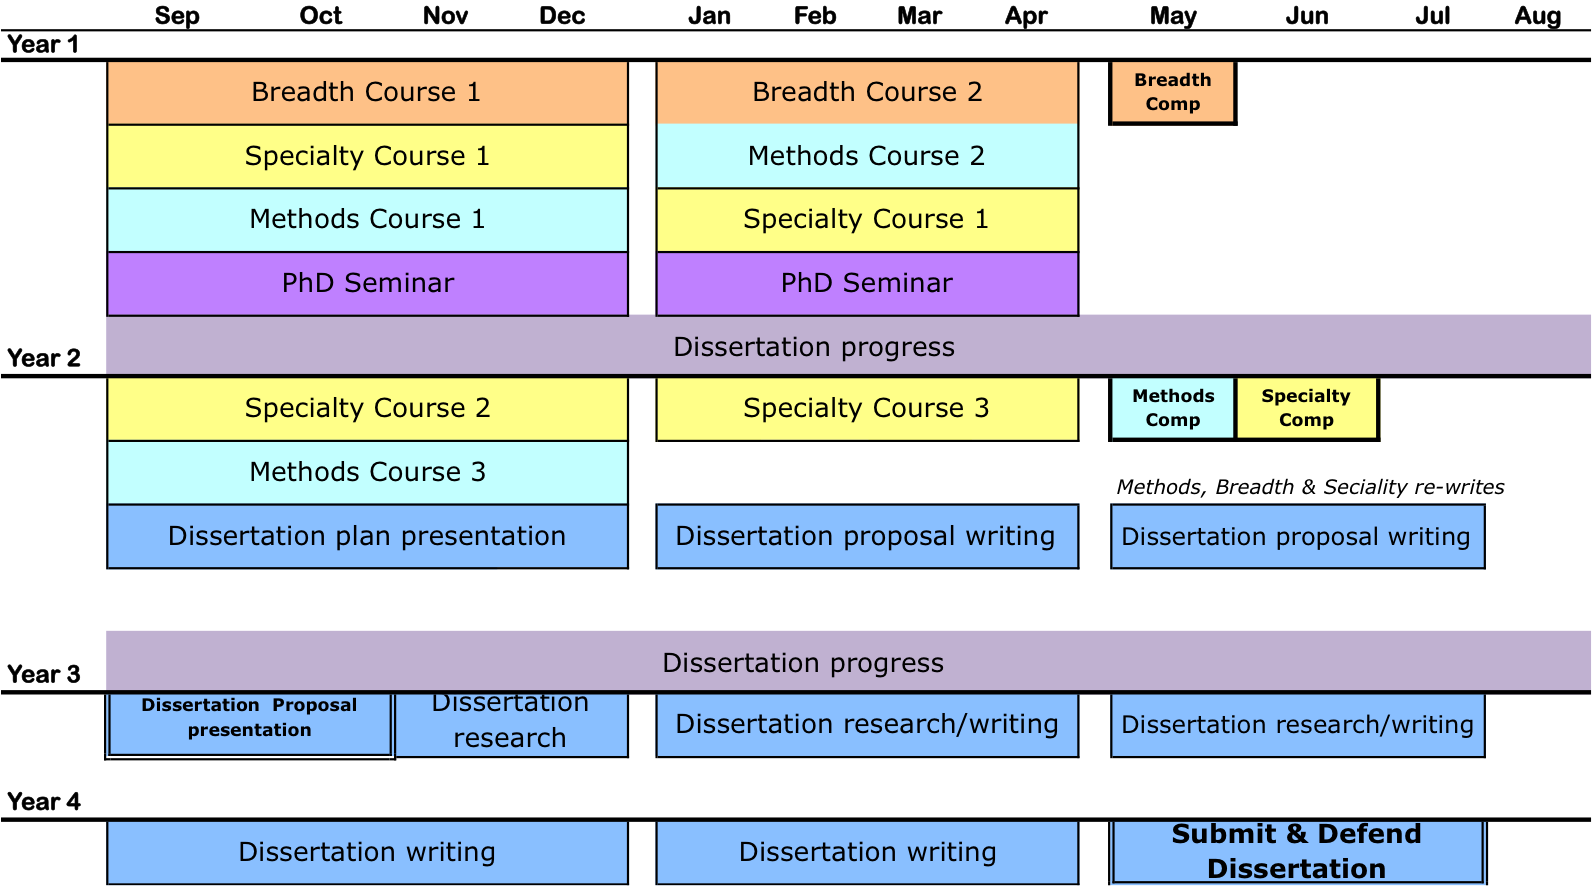 Sample Curriculum Timeline showing 4 years of study. Summarized below.